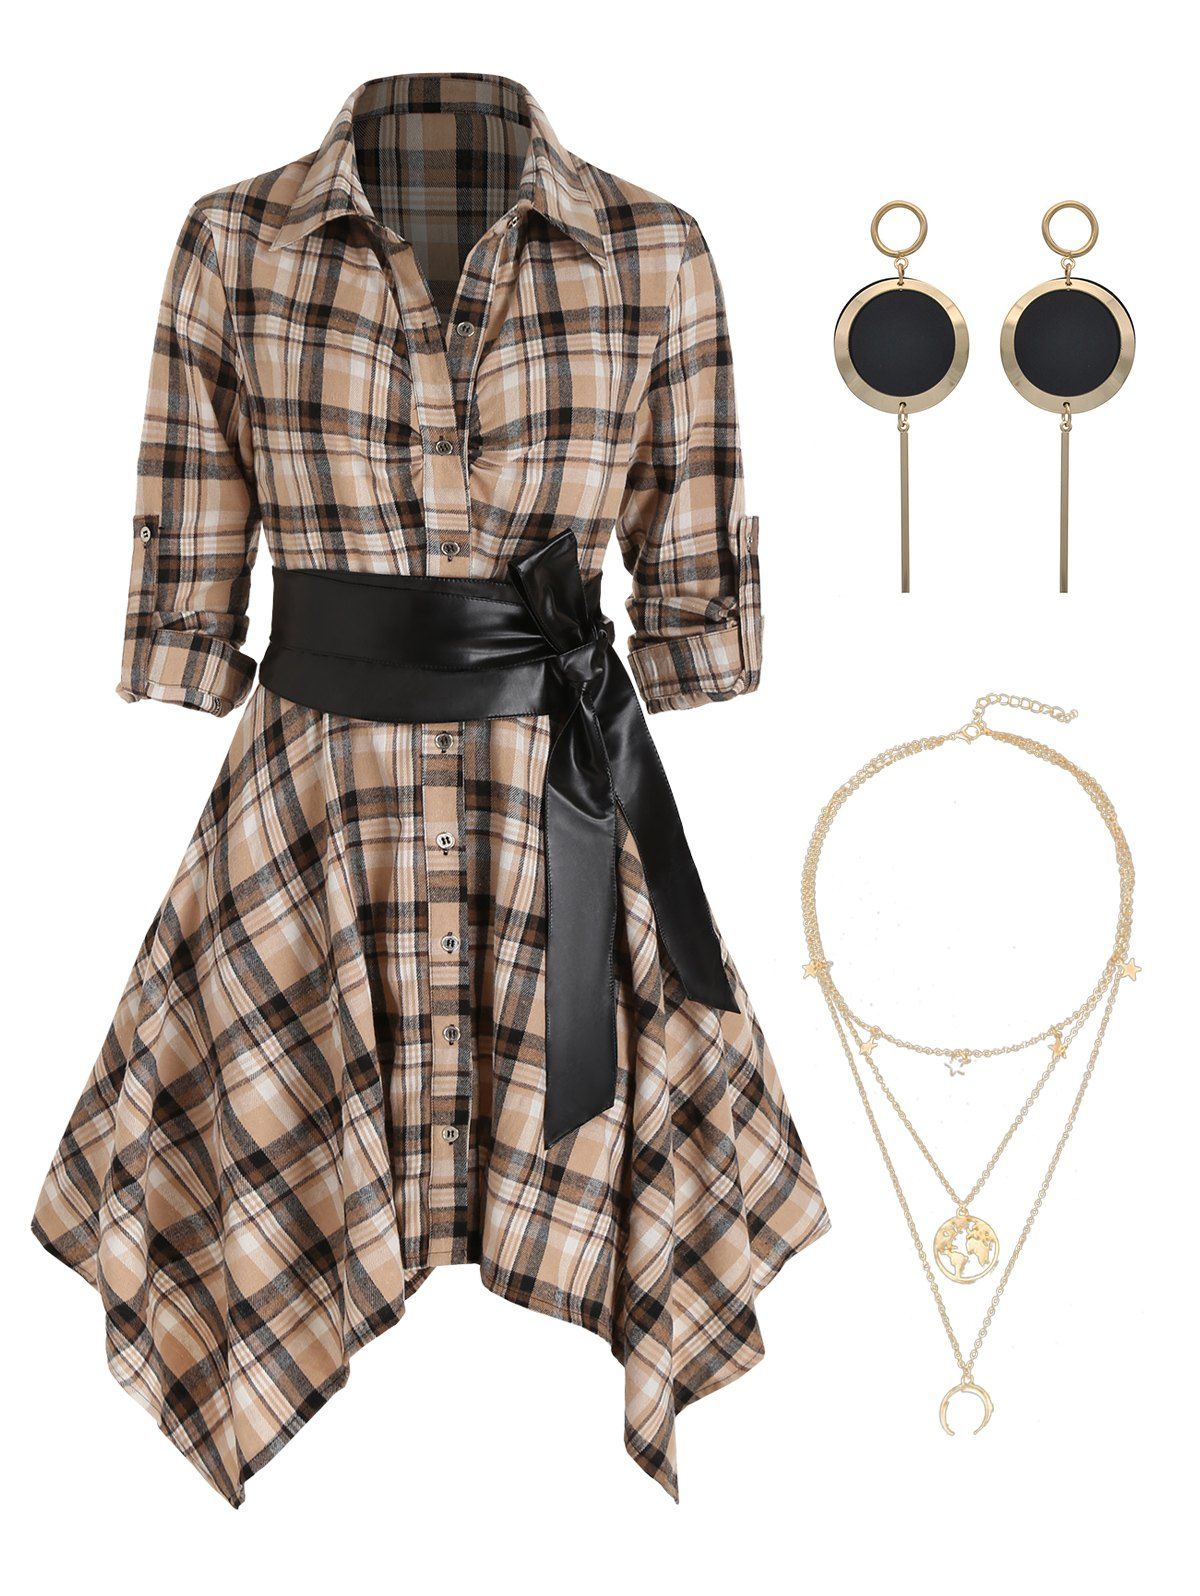 Plaid Belted Roll Tab Sleeve Handkerchief Dress And Layered Chain Necklace Drop Earrings Outfit - COFFEE S